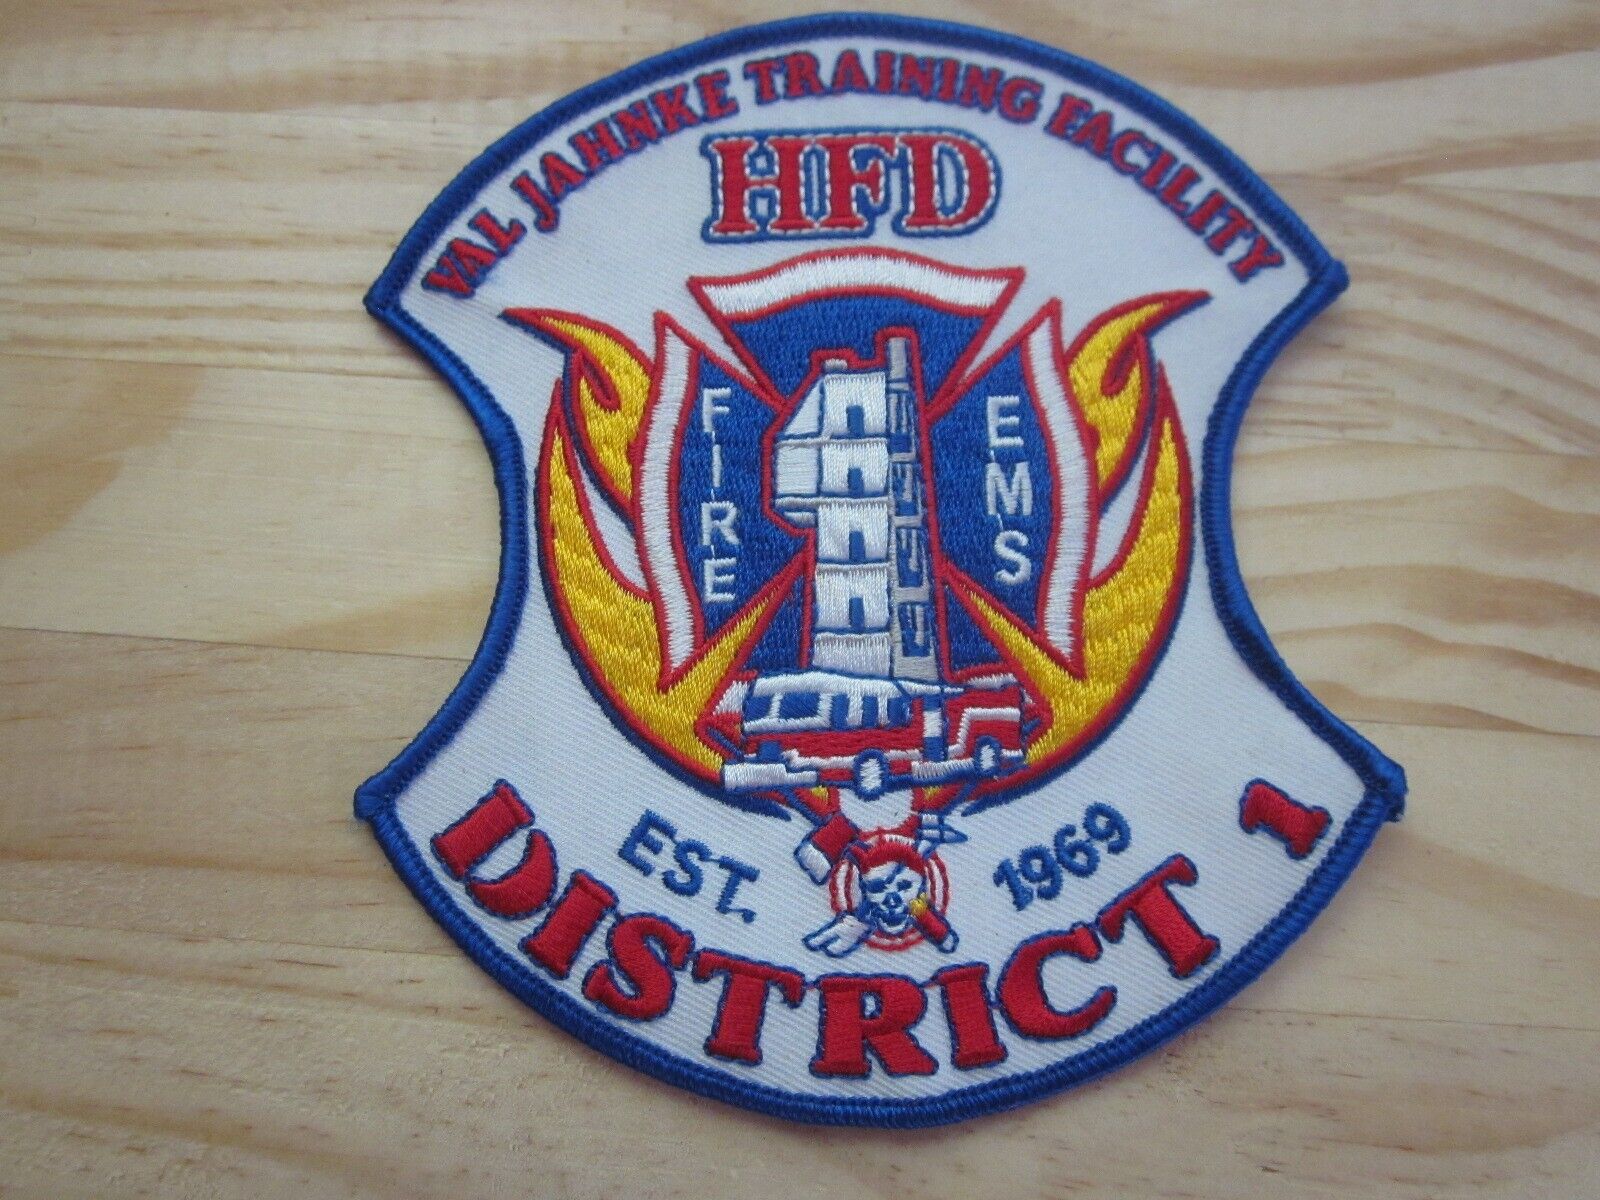 Houston Fire Department PATCH Texas TX Val Jahnke Training Facility EMS RARE old